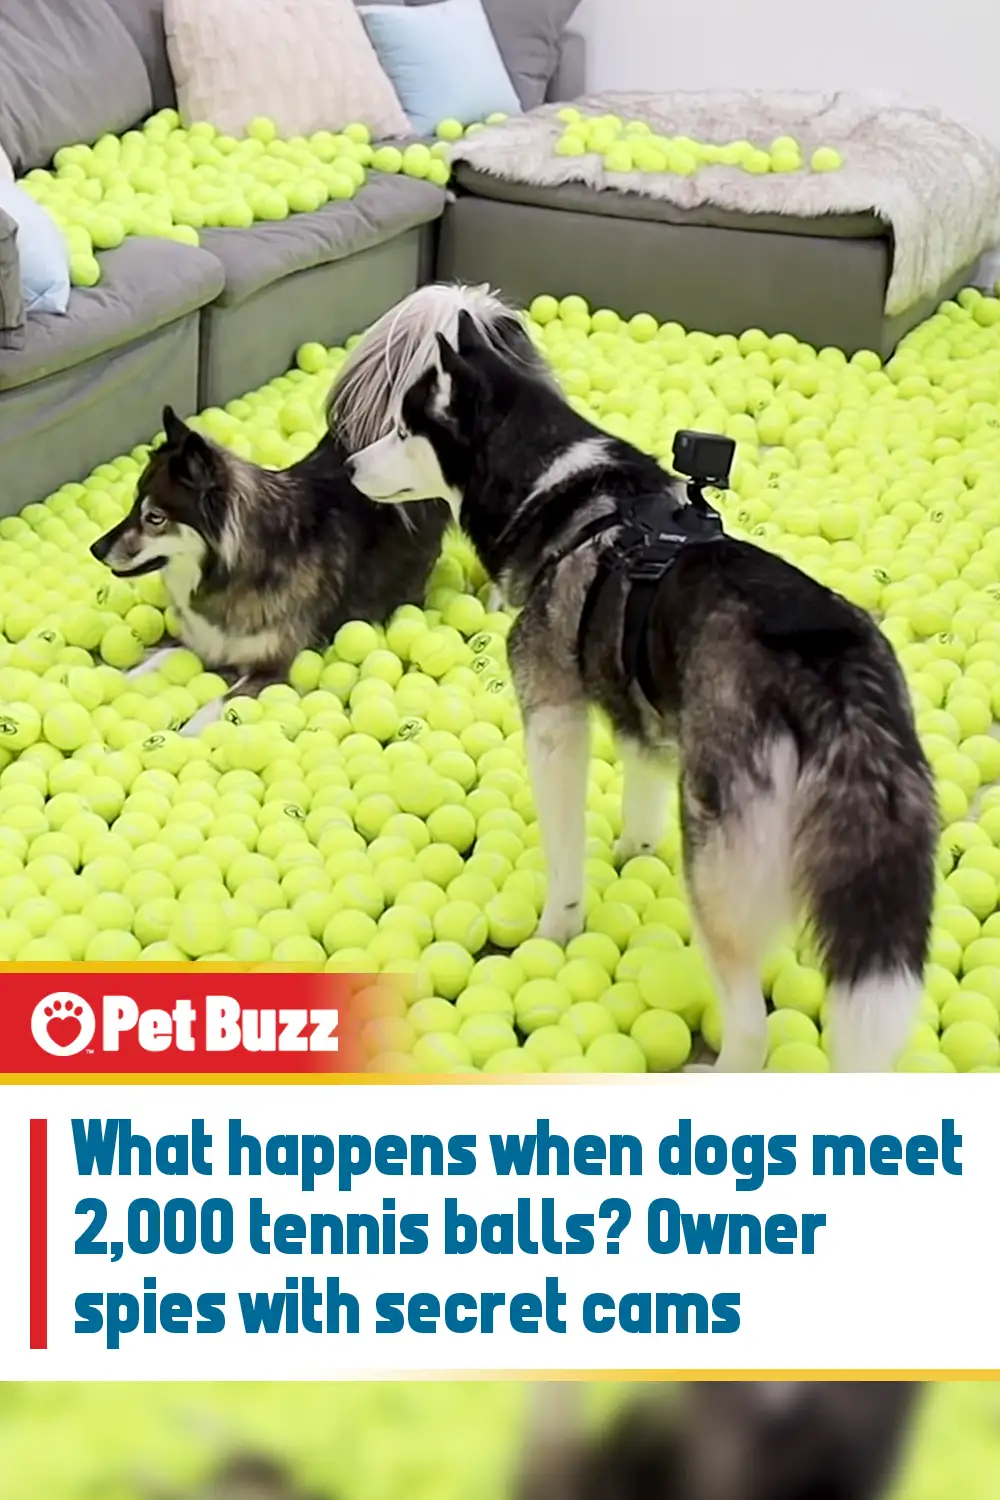 What happens when dogs meet 2,000 tennis balls? Owner spies with secret cams